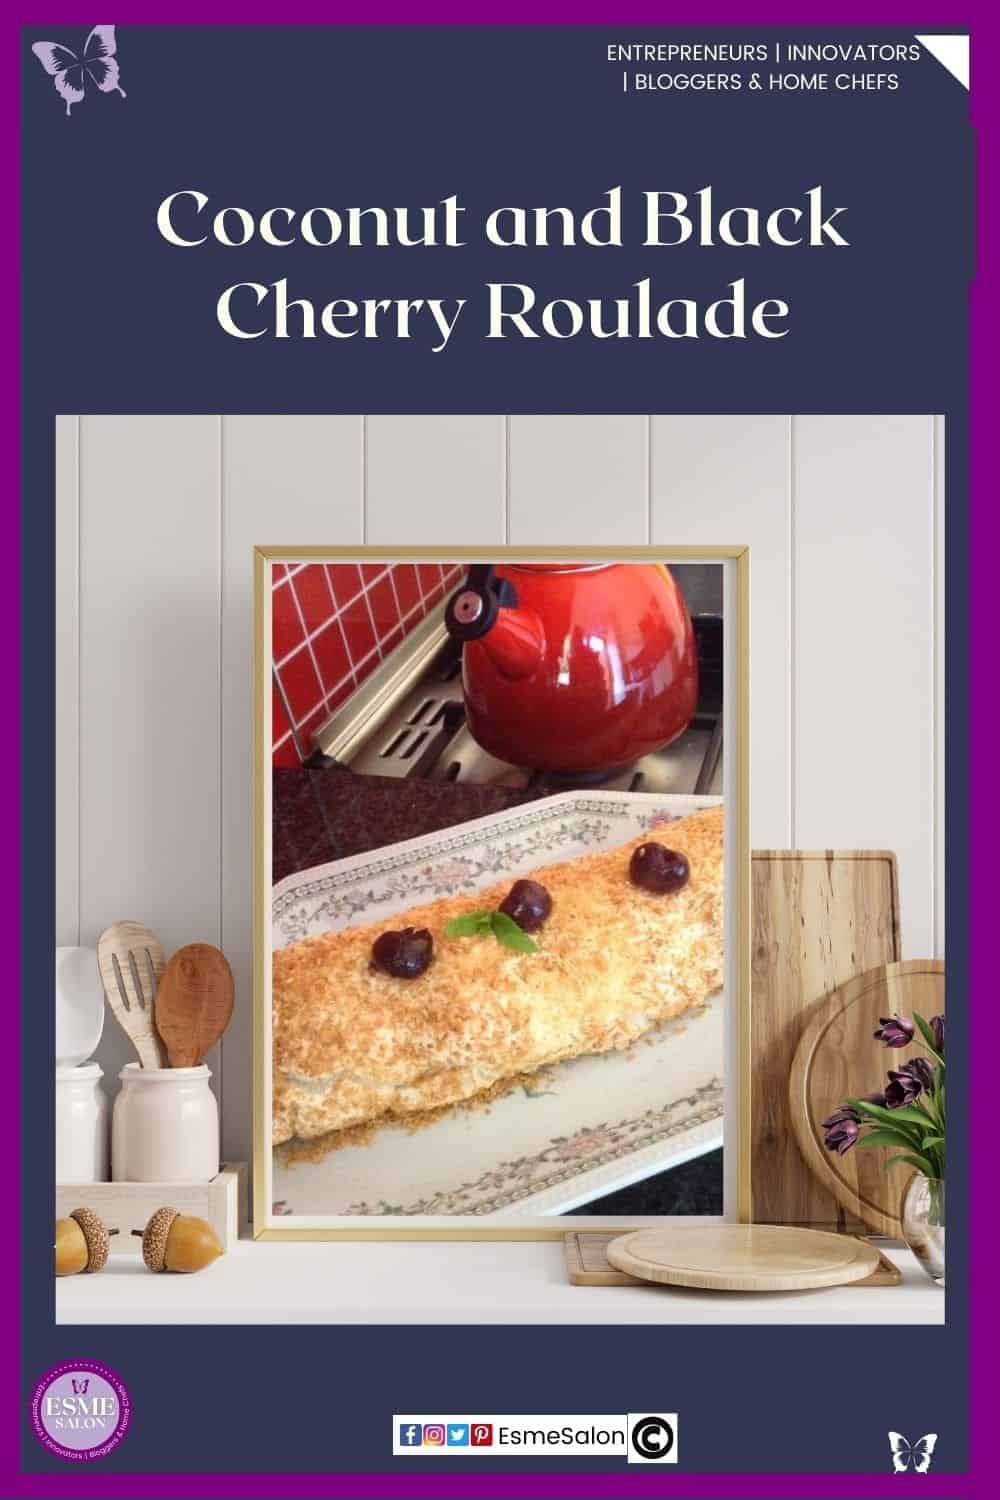 an image of a Coconut Roulade un a white plate with Black Cherries in the middle as well as on top